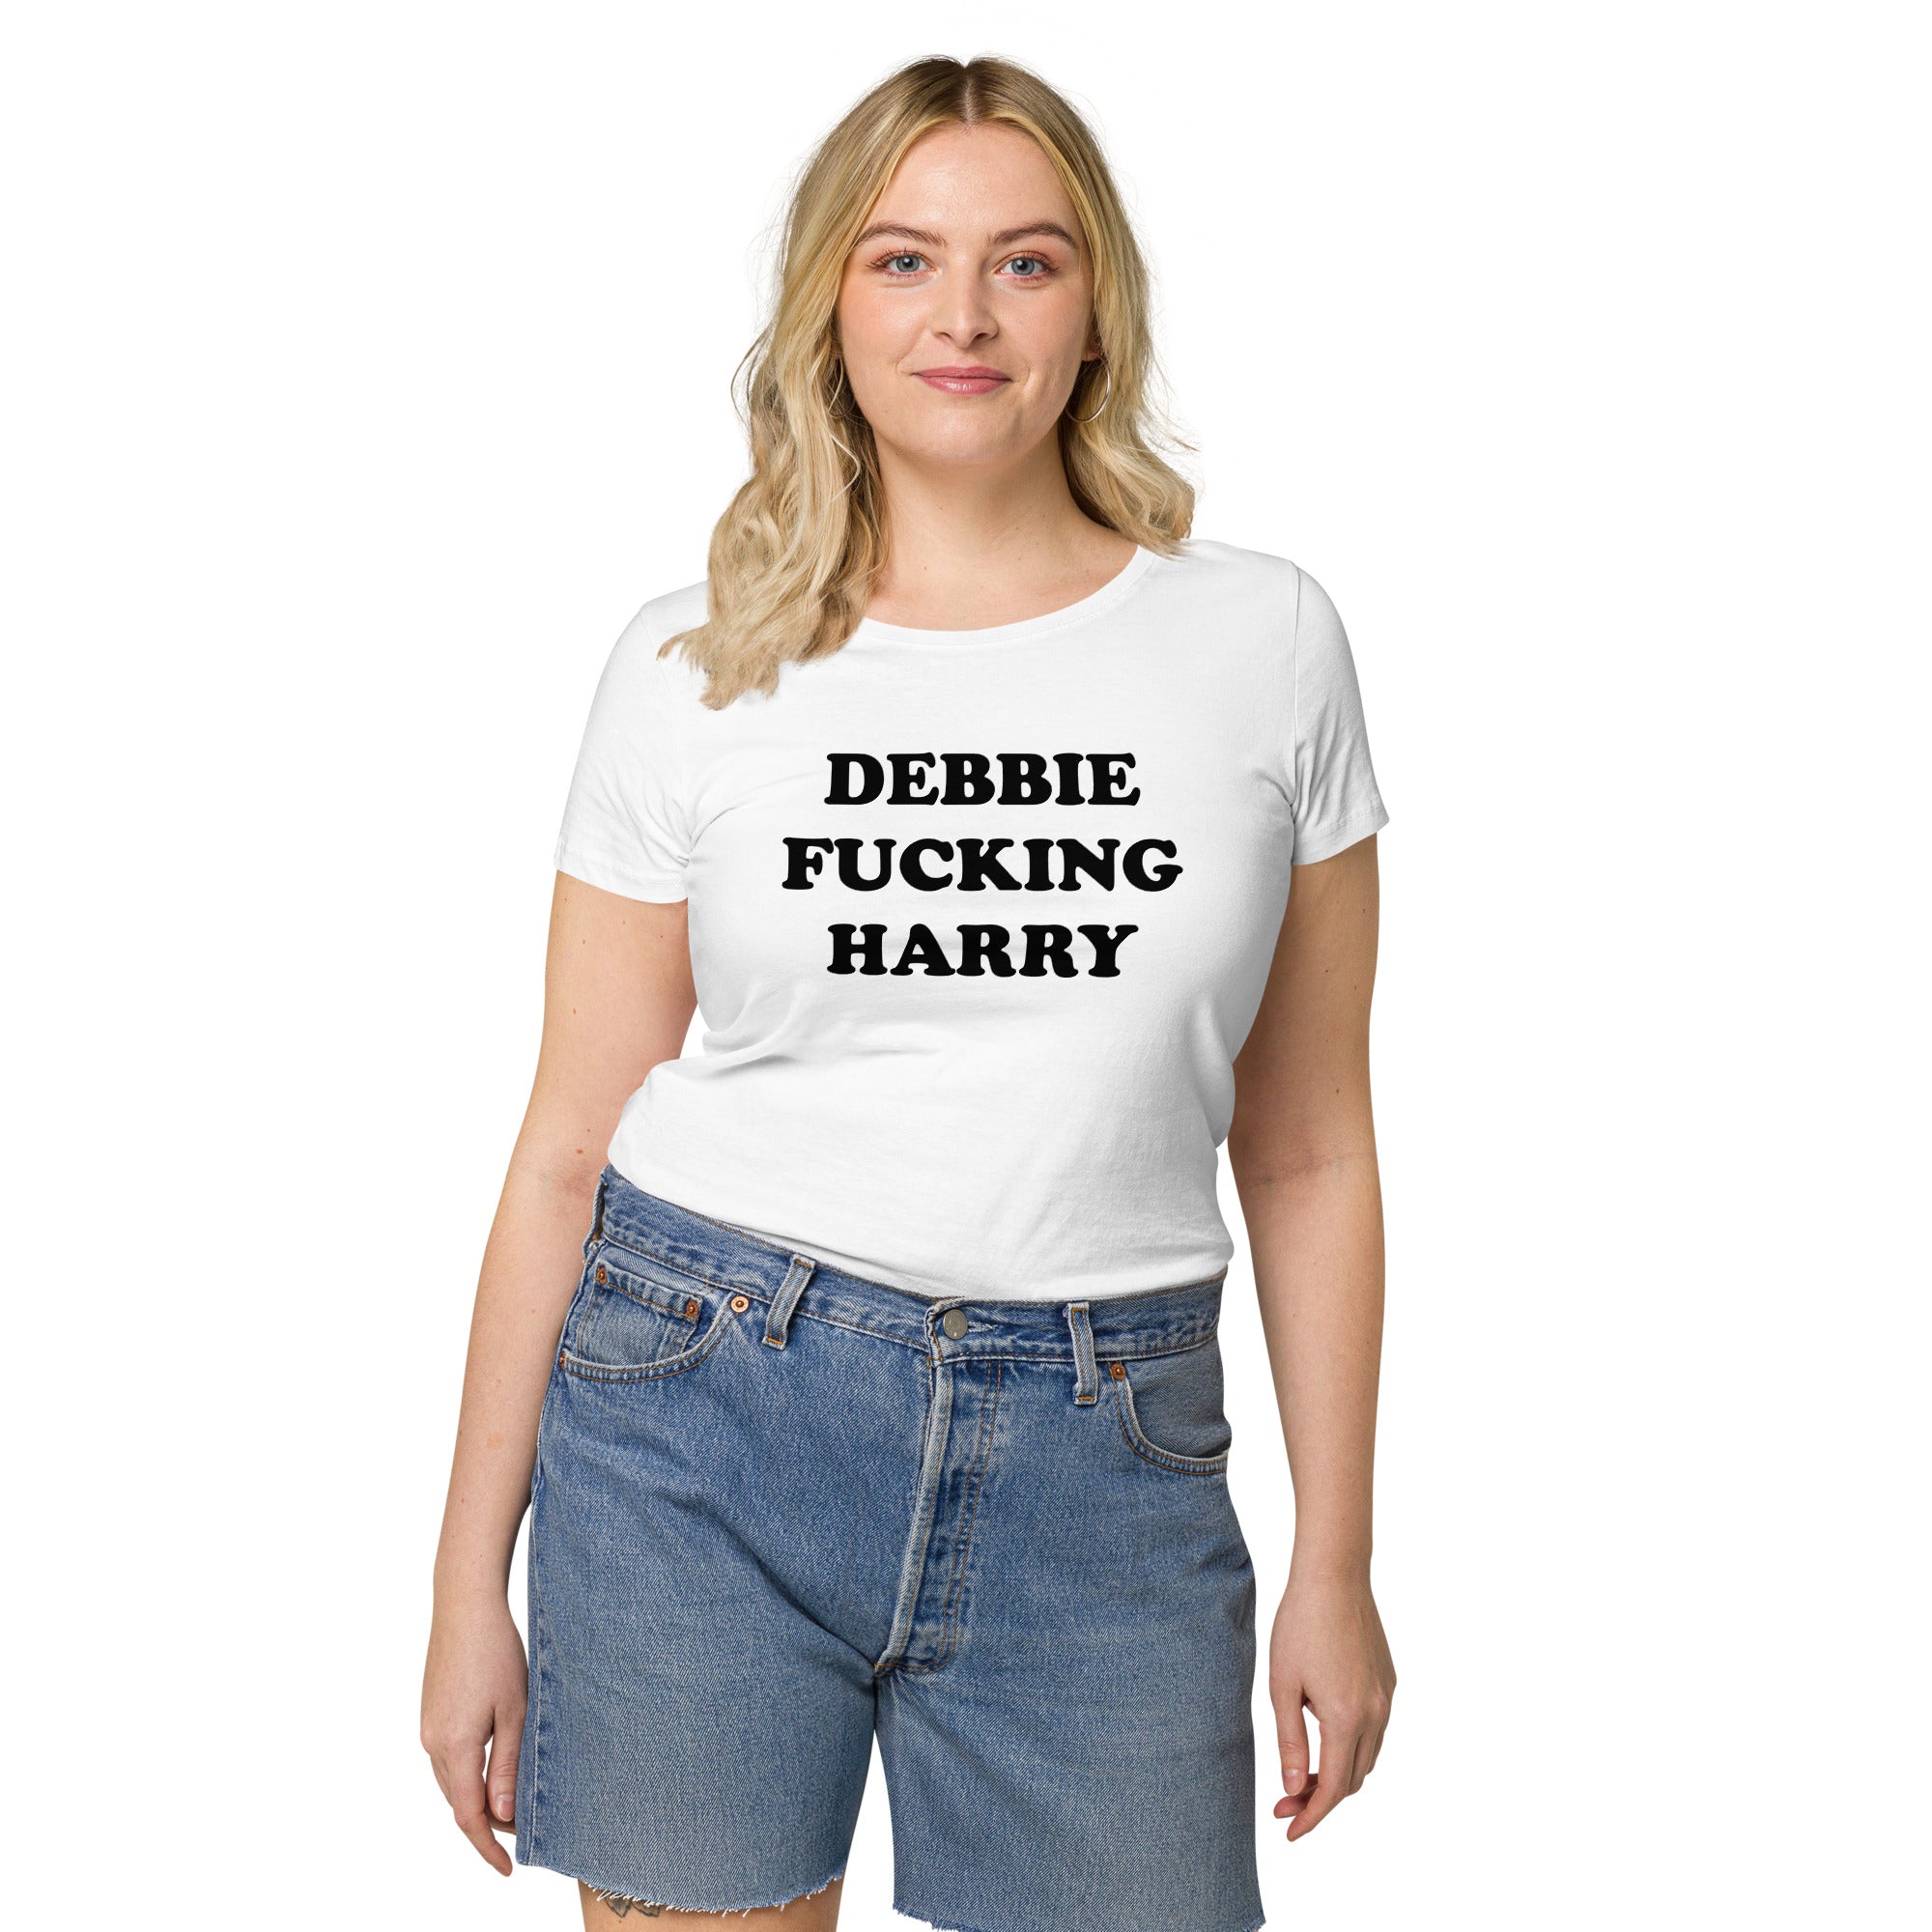 DEBBIE F*CKING HARRY Printed Women’s Fitted Organic T-shirt